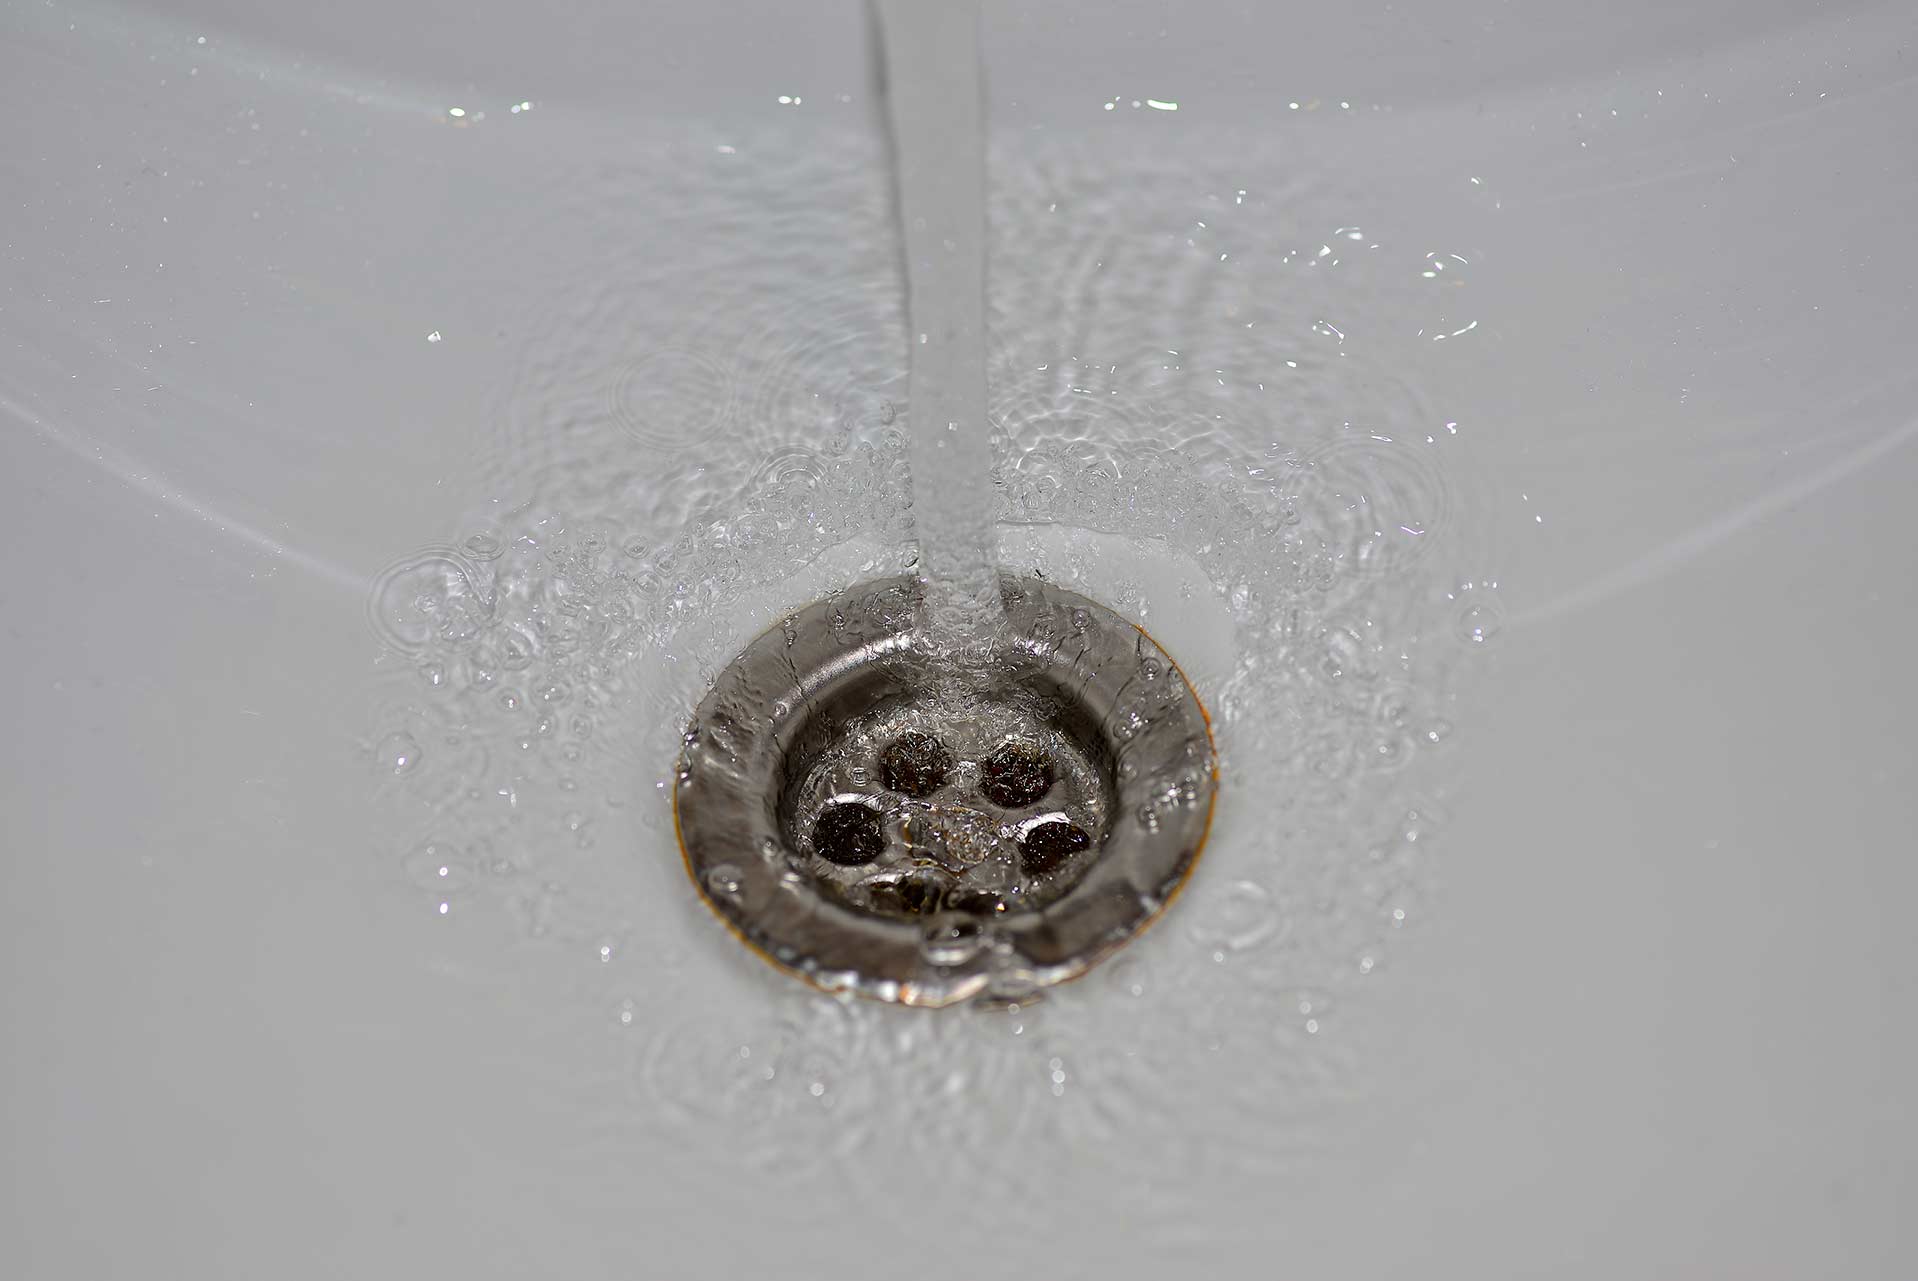 A2B Drains provides services to unblock blocked sinks and drains for properties in Caernarfon.